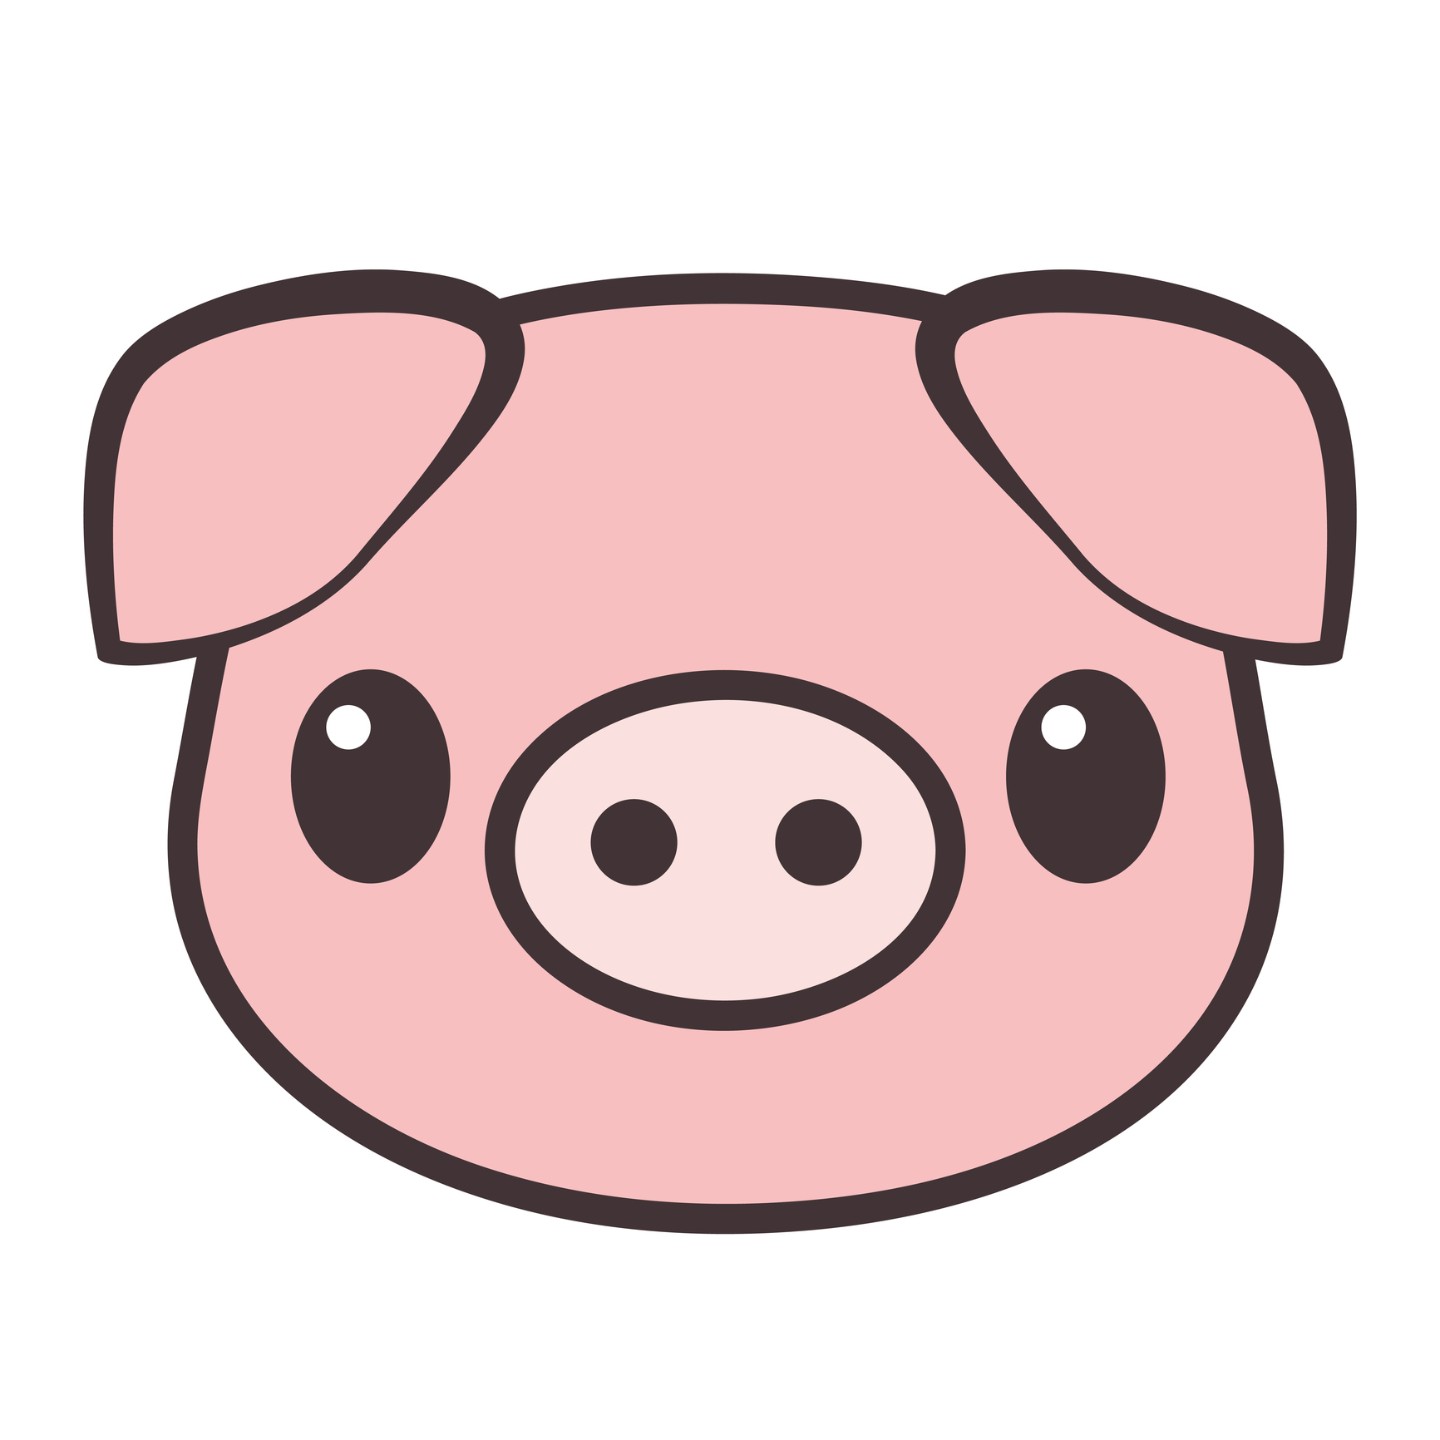 Cartoon pig face. Vector illustration||Pig with glasses icon